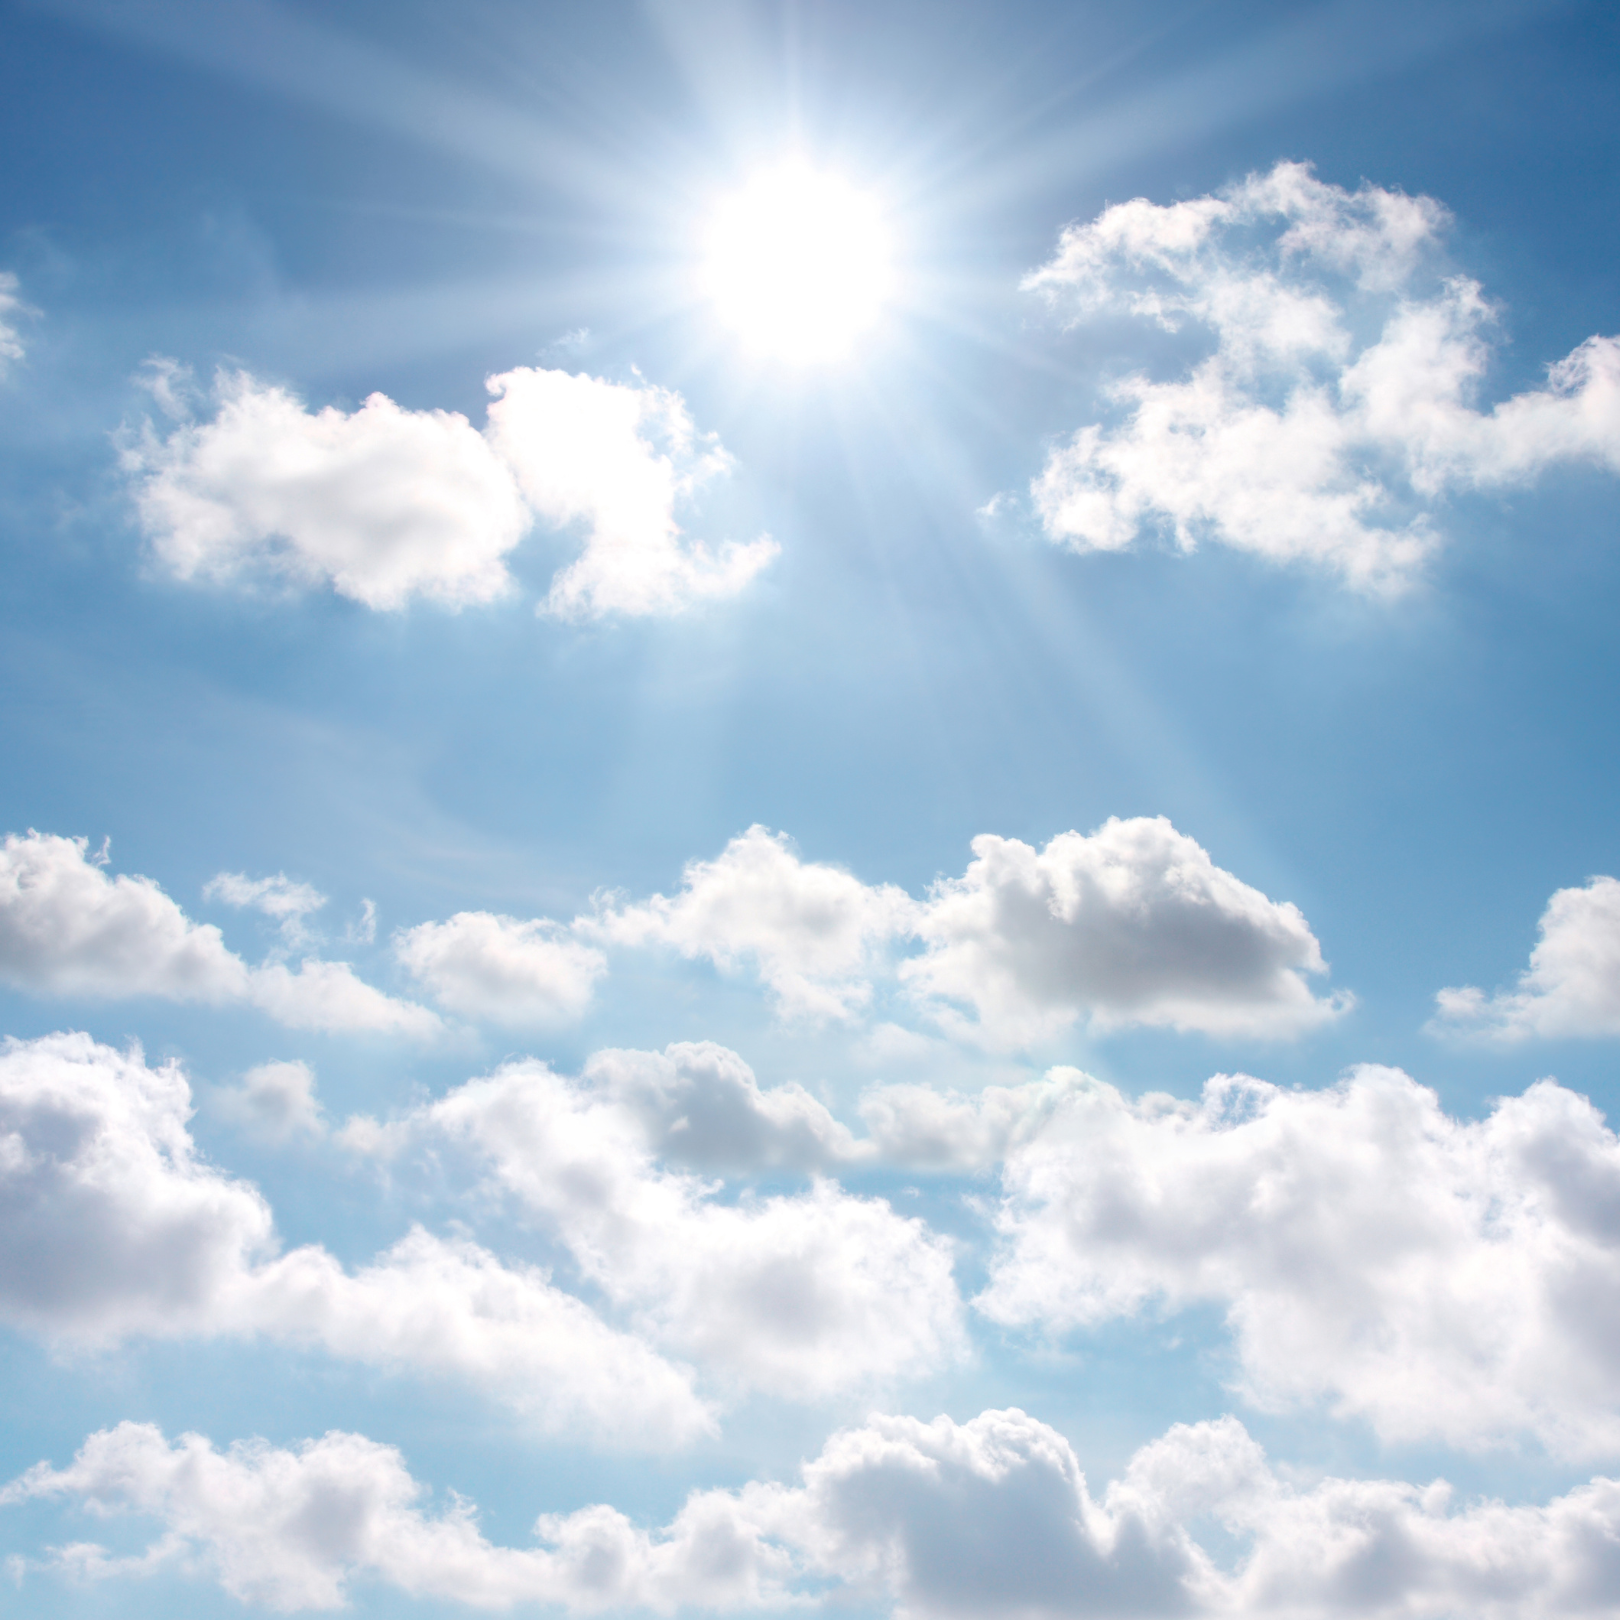 Image of the sun and blue sky and white clouds